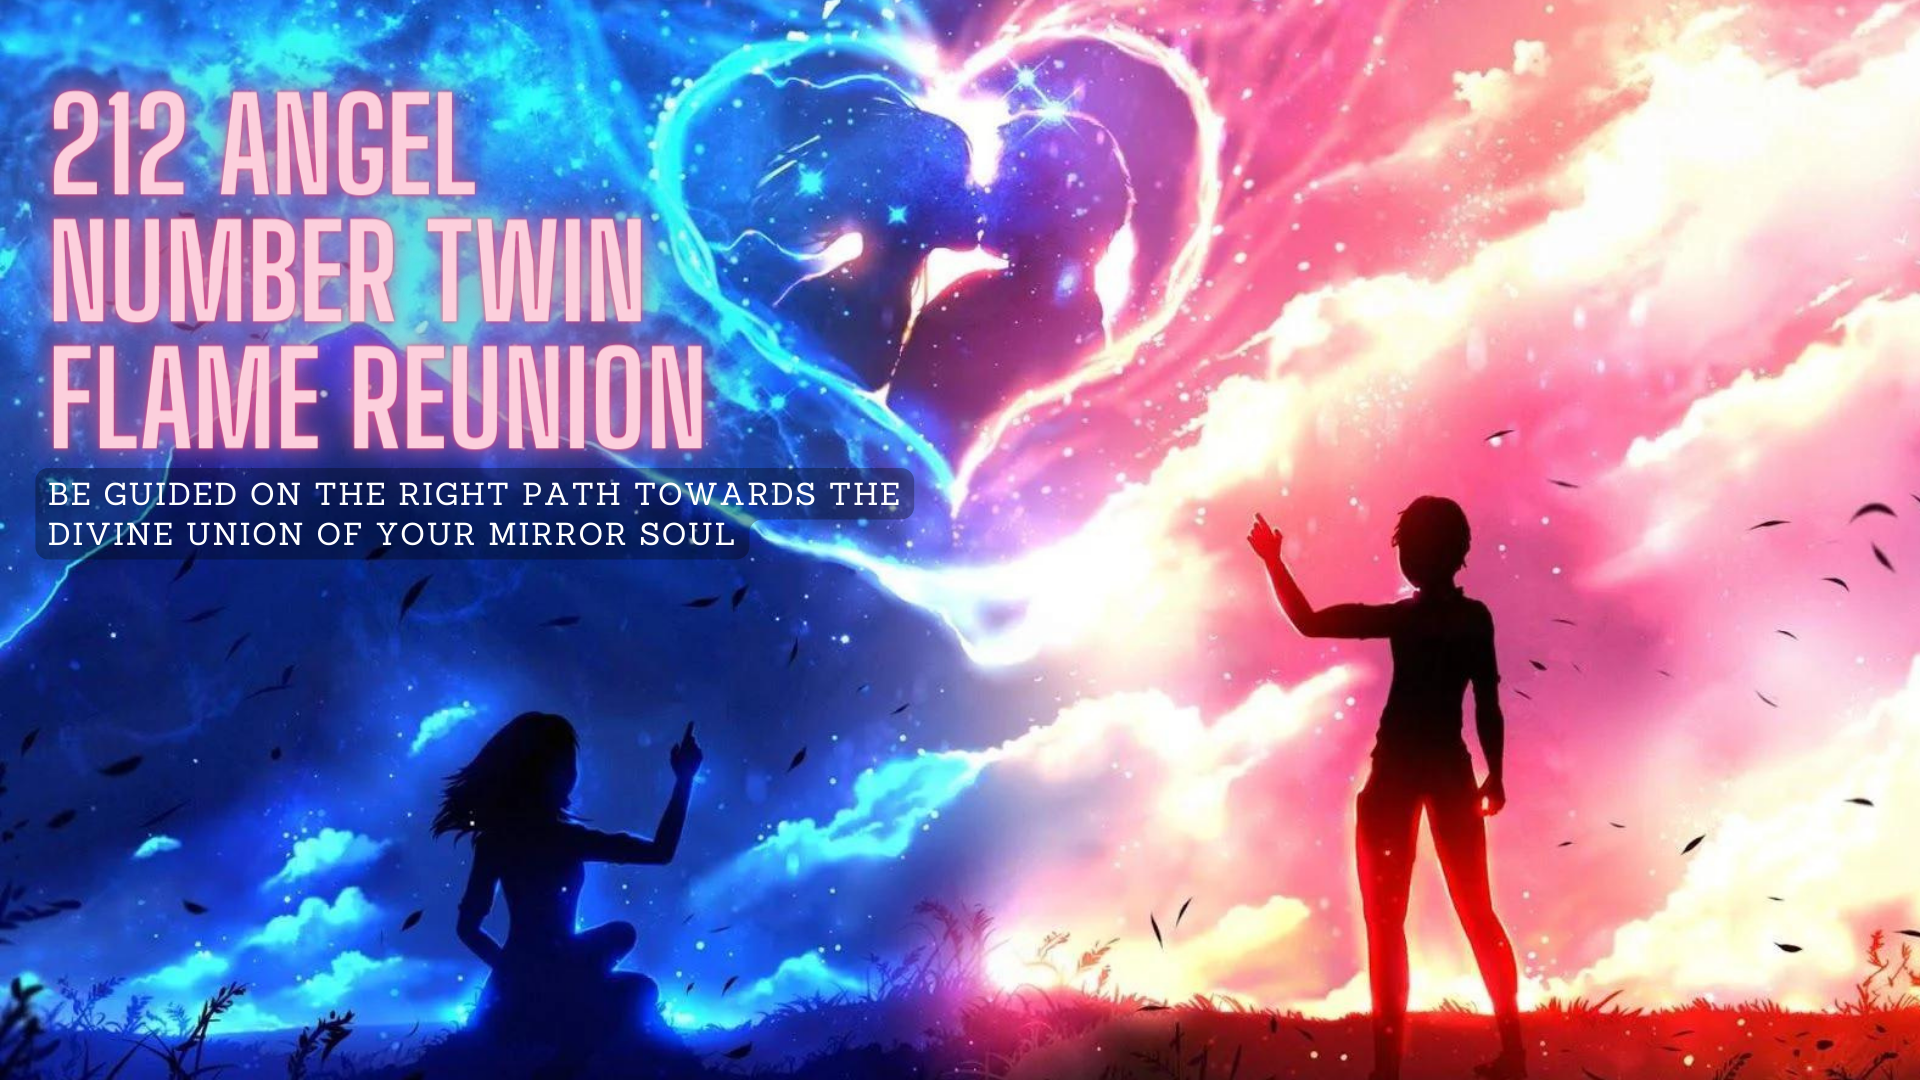 212 Angel Number Twin Flame Reunion - Be Guided On The Right Path Towards The Divine Union Of Your Mirror Soul